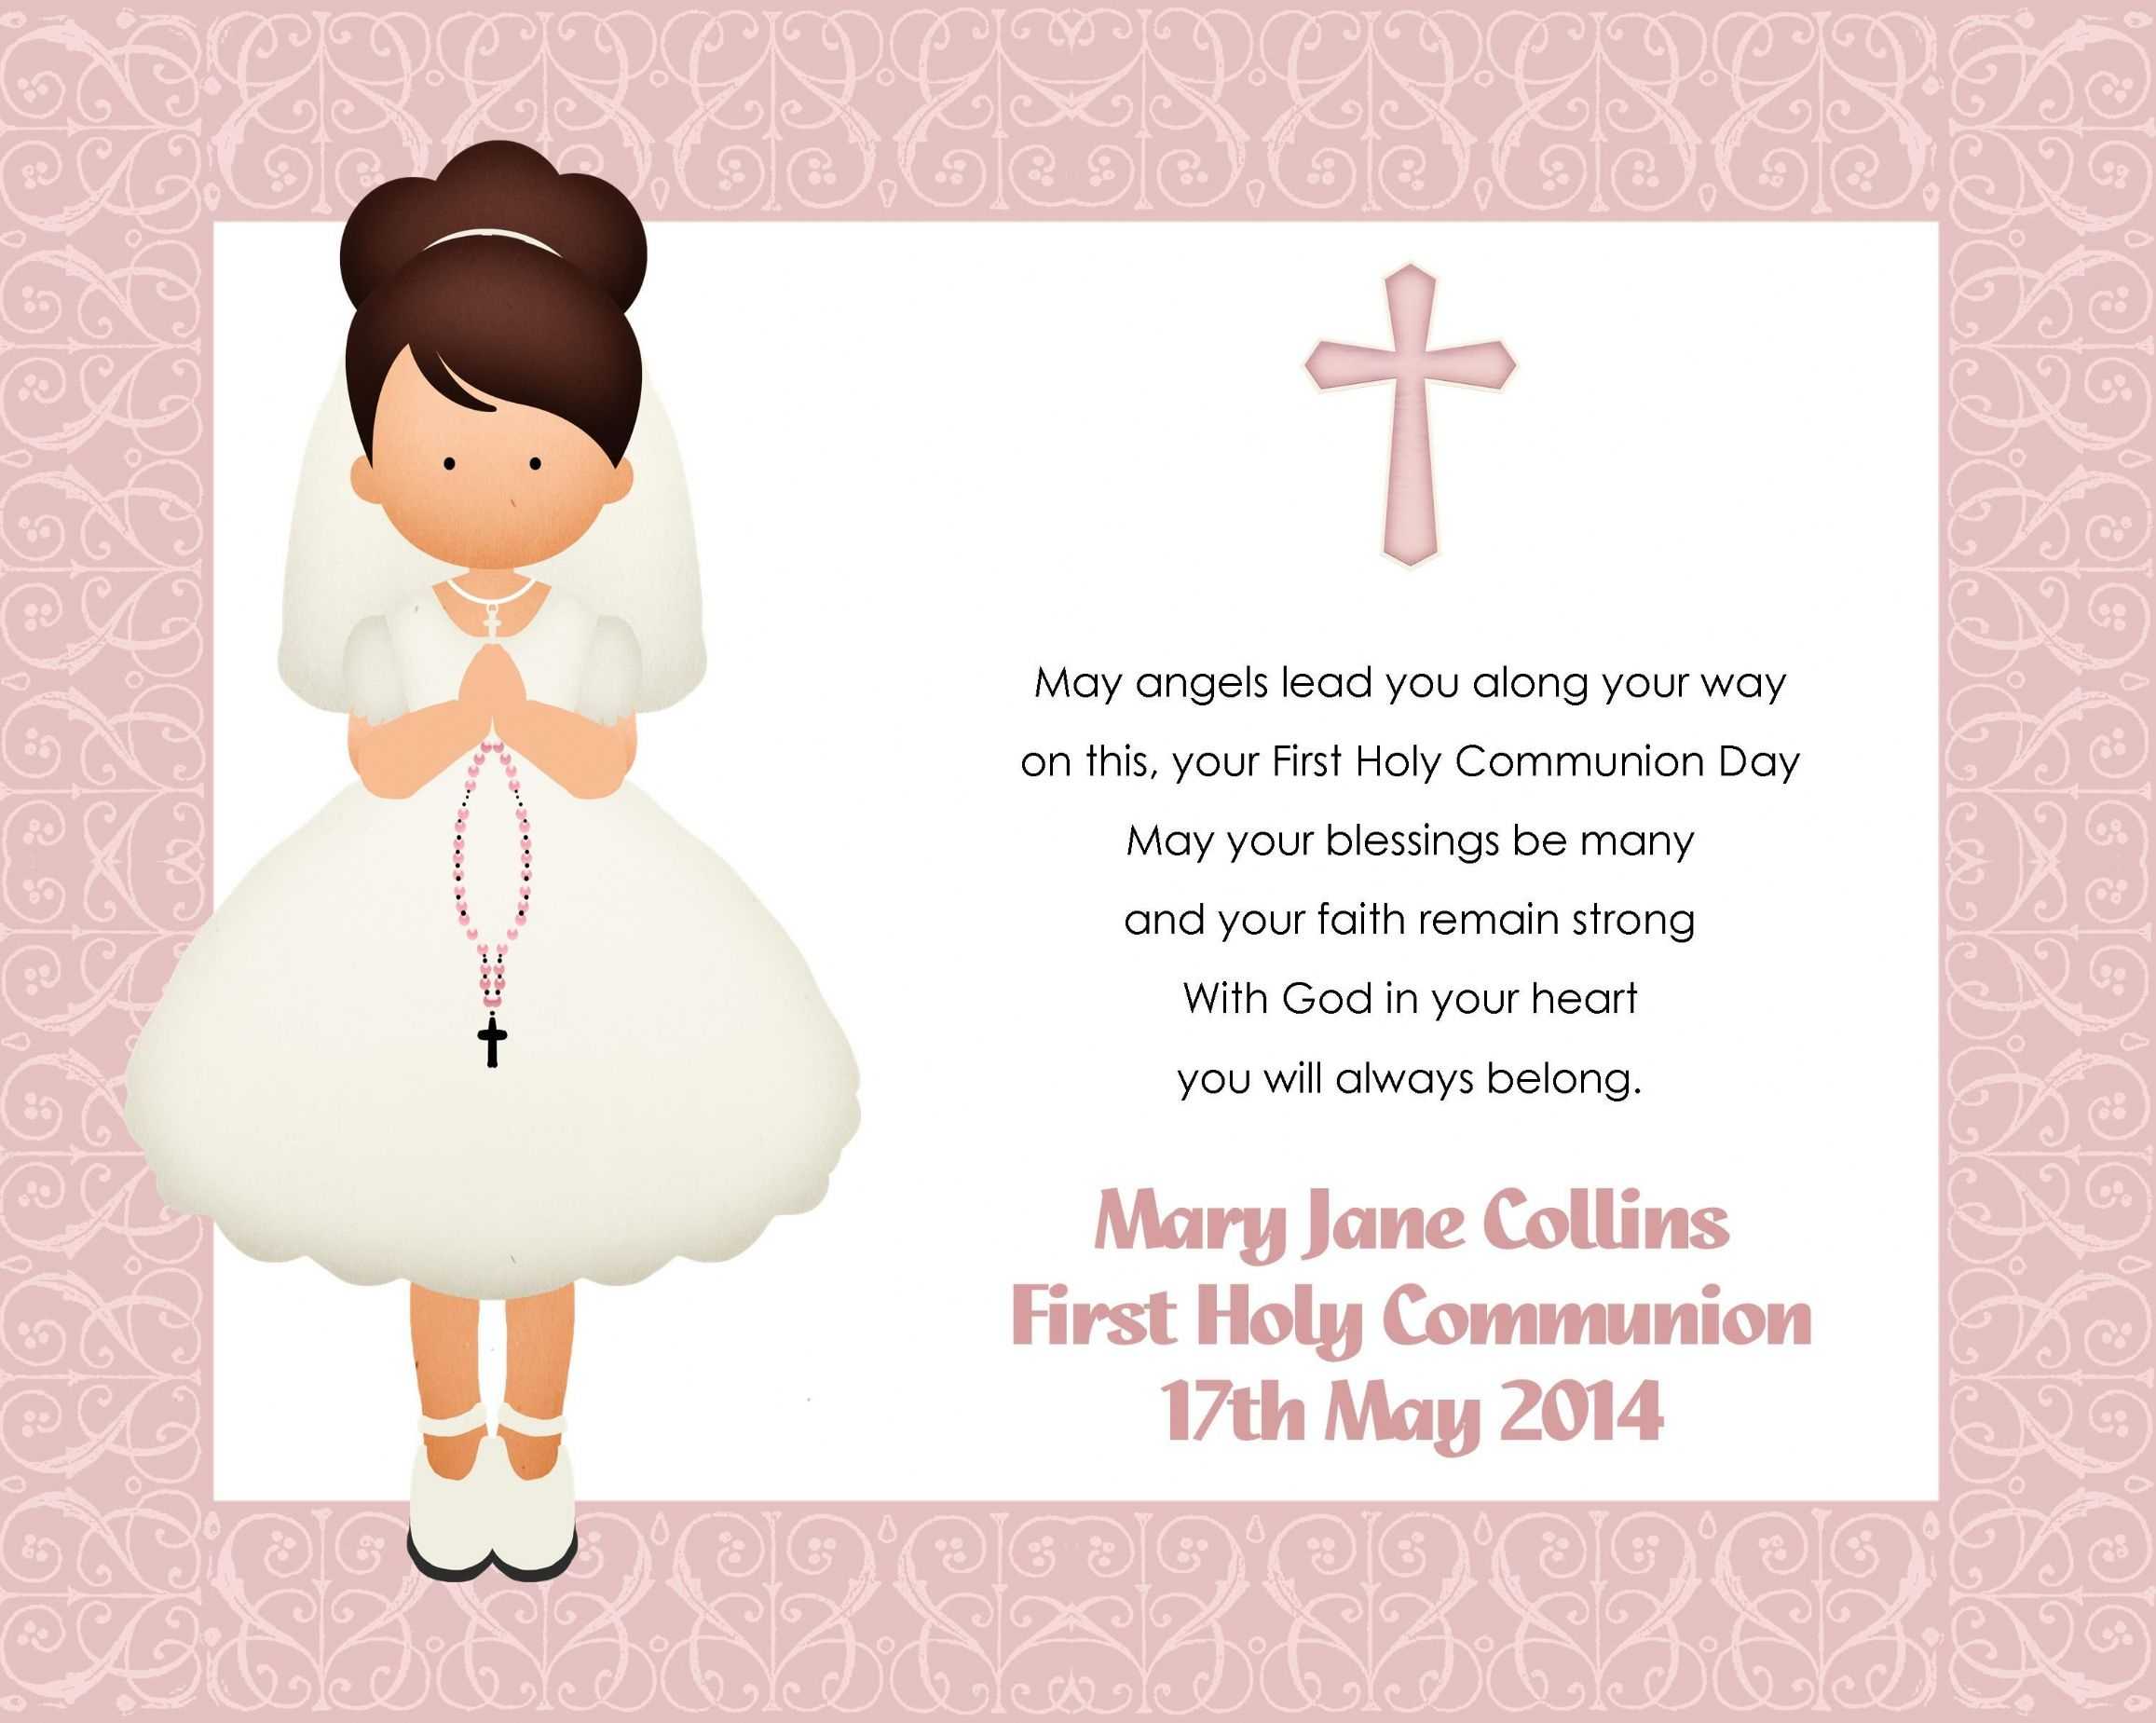 First Holy Communion Cards Printable Free That Are Pertaining To Free Printable First Communion Banner Templates